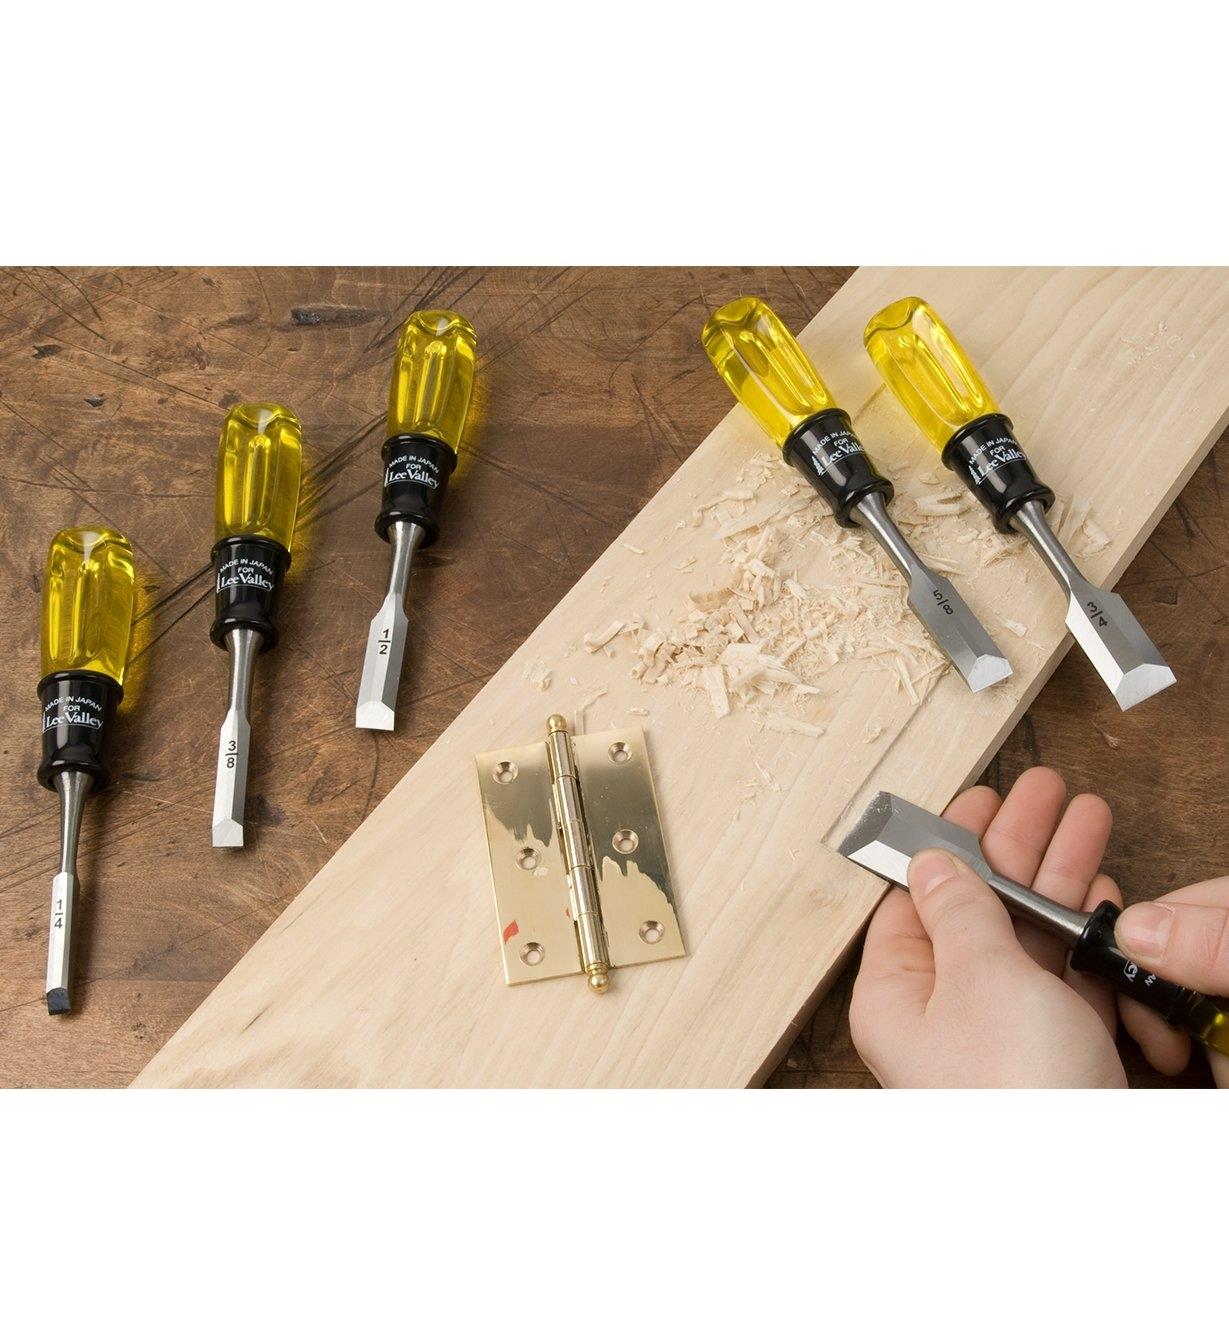 44S0230 - Lee Valley Butt Chisel Set of 6